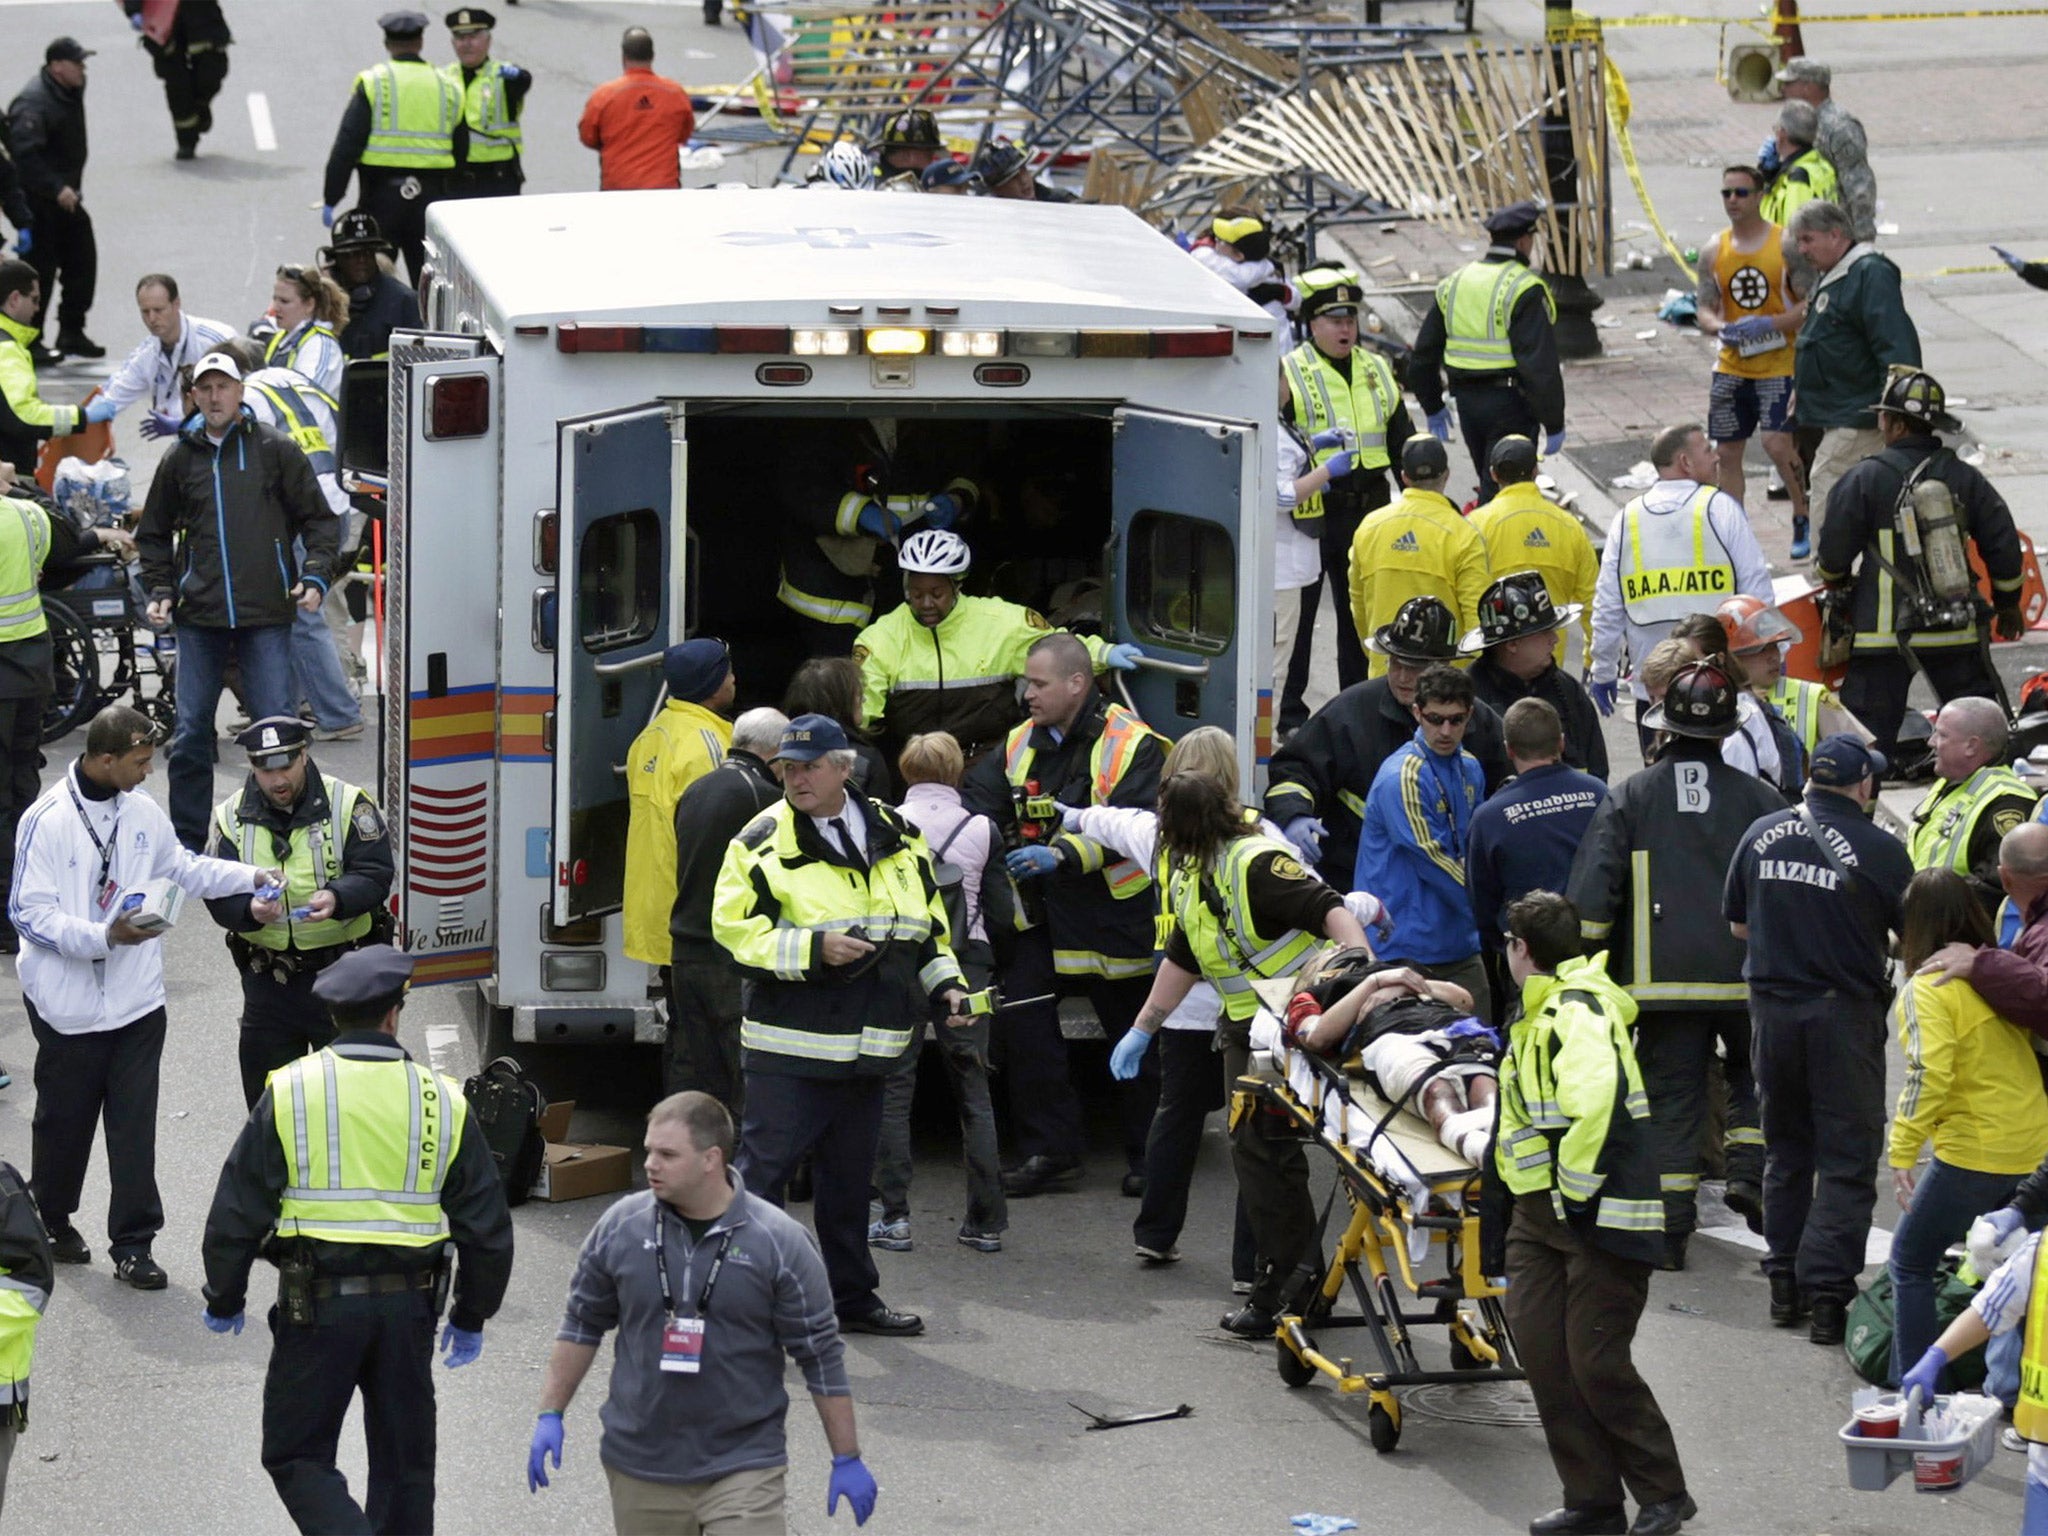 Medical workers aid injured people at the finish line of the 2013 Boston Marathon immediately following the attack